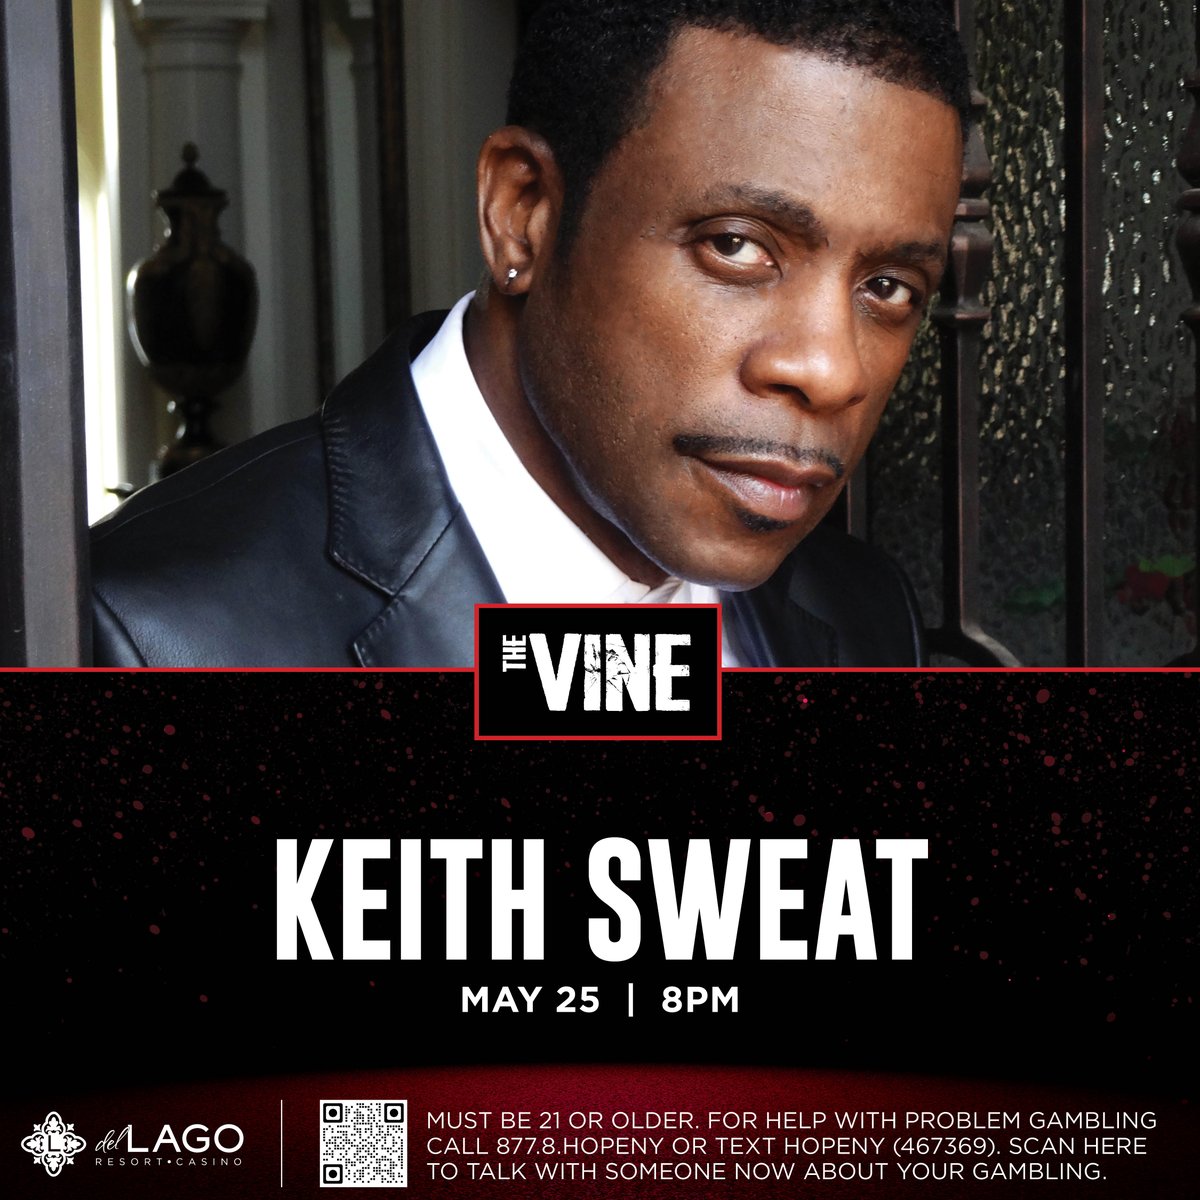 TICKETS ON SALE NOW: loom.ly/bnmaajo Keith Sweat takes The Vine Stage on Saturday, May 25 at 8PM for a night of R&B! 🎶 Grab your tickets now to enjoy songs 'Twisted,' 'Make It Last Forever' and more. #delLagoNY #AtTheVine